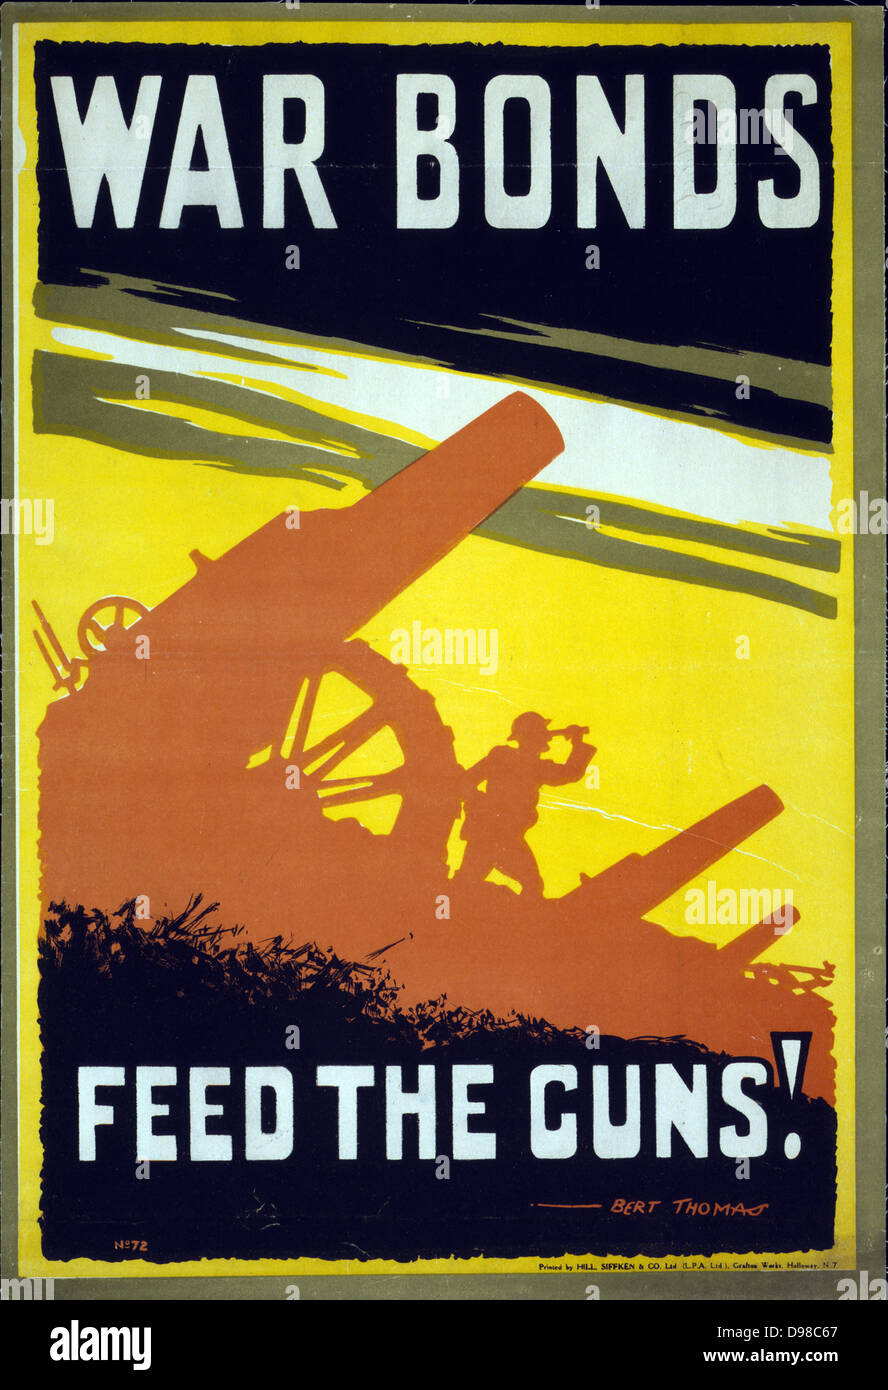 War bonds. Feed the guns! Artist Thomas, Bert, 1883-1966. Published:  1915 Summary: Poster showing a range of artillery, with soldier looking through a telescope. Stock Photo